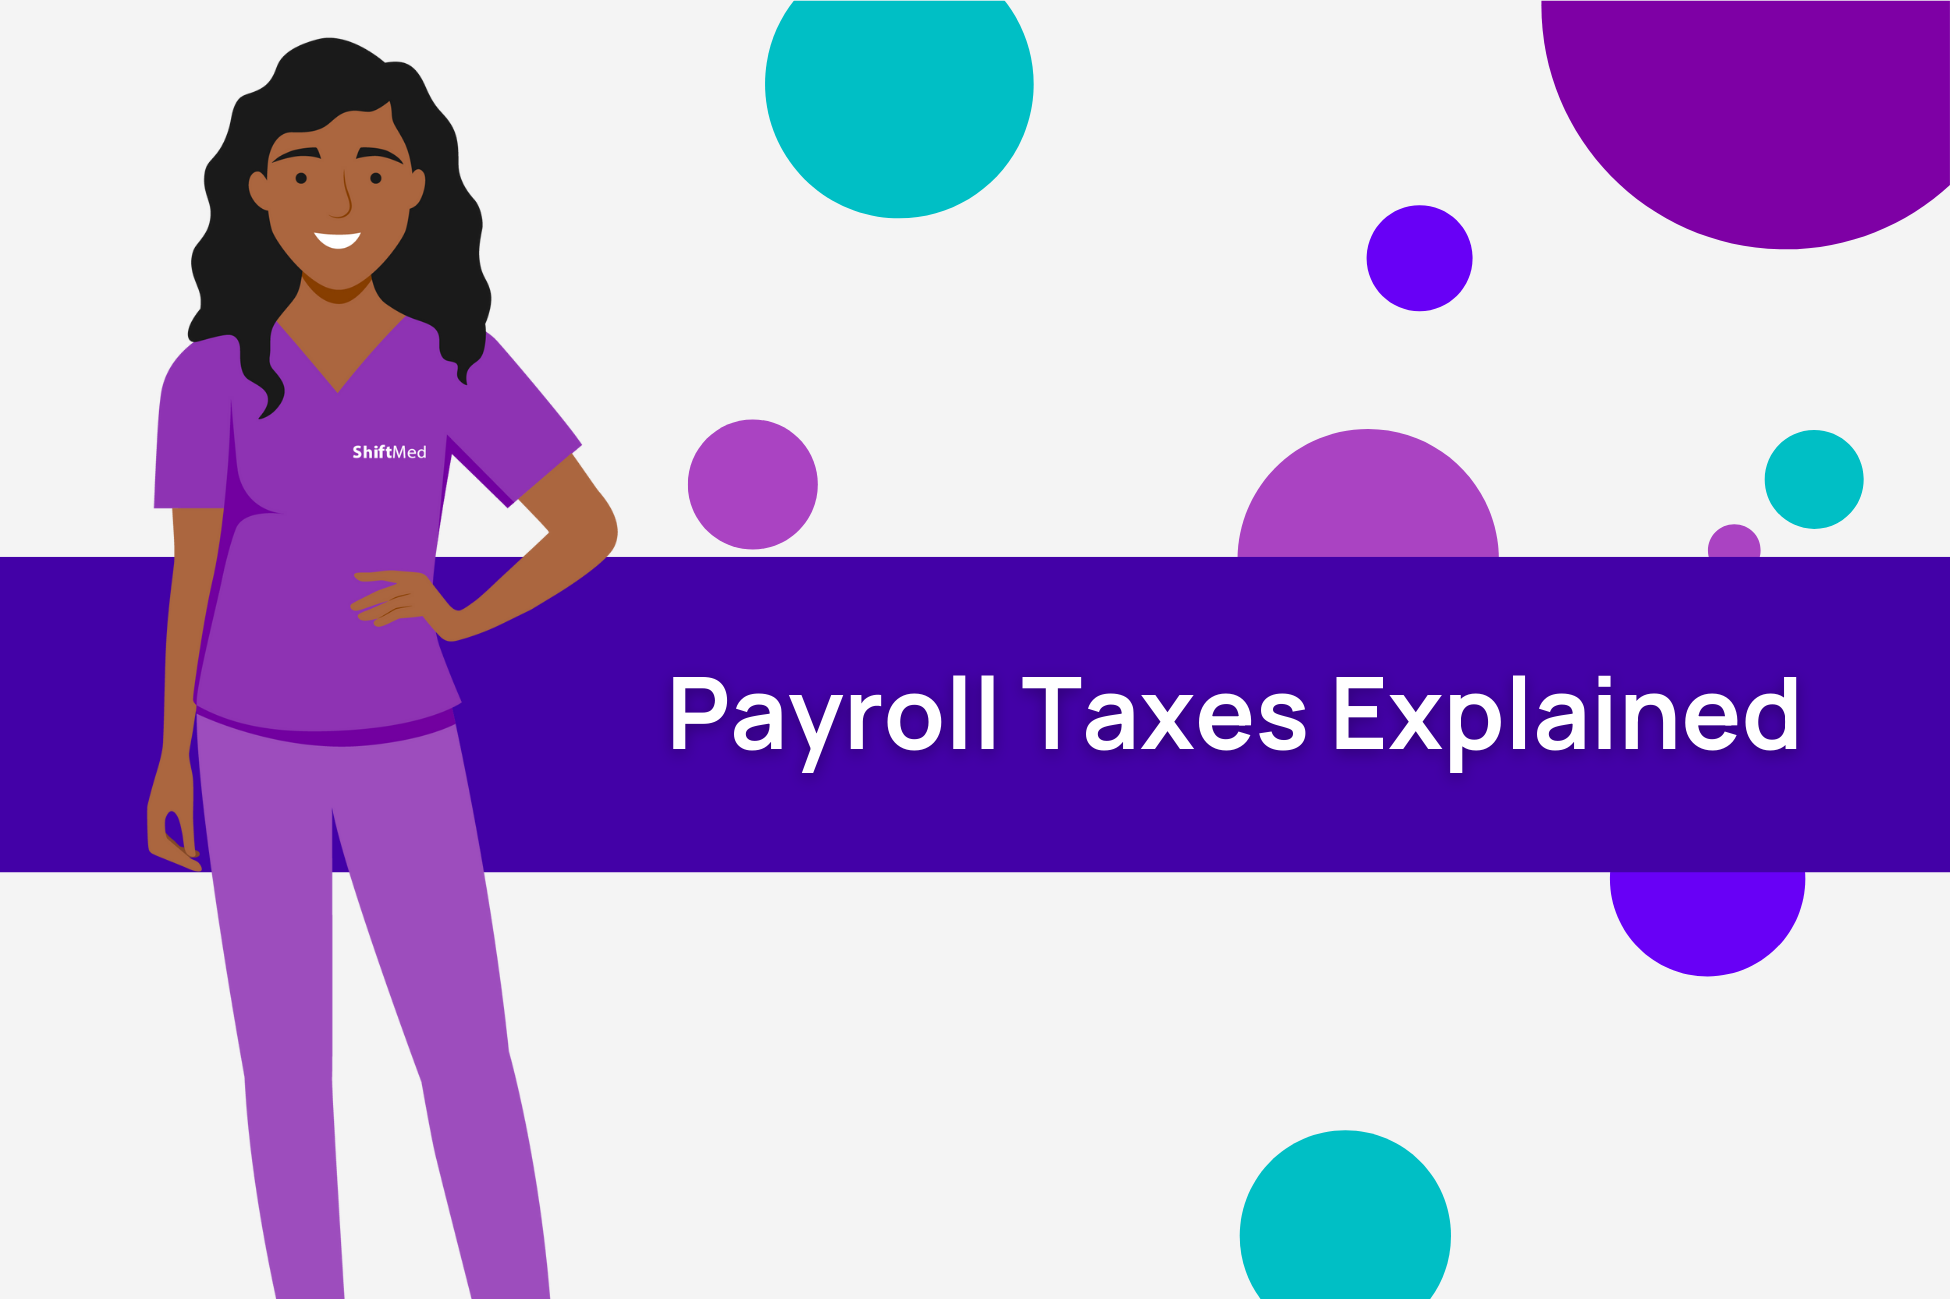 When it comes to payroll taxes, there are three things you need to know.

